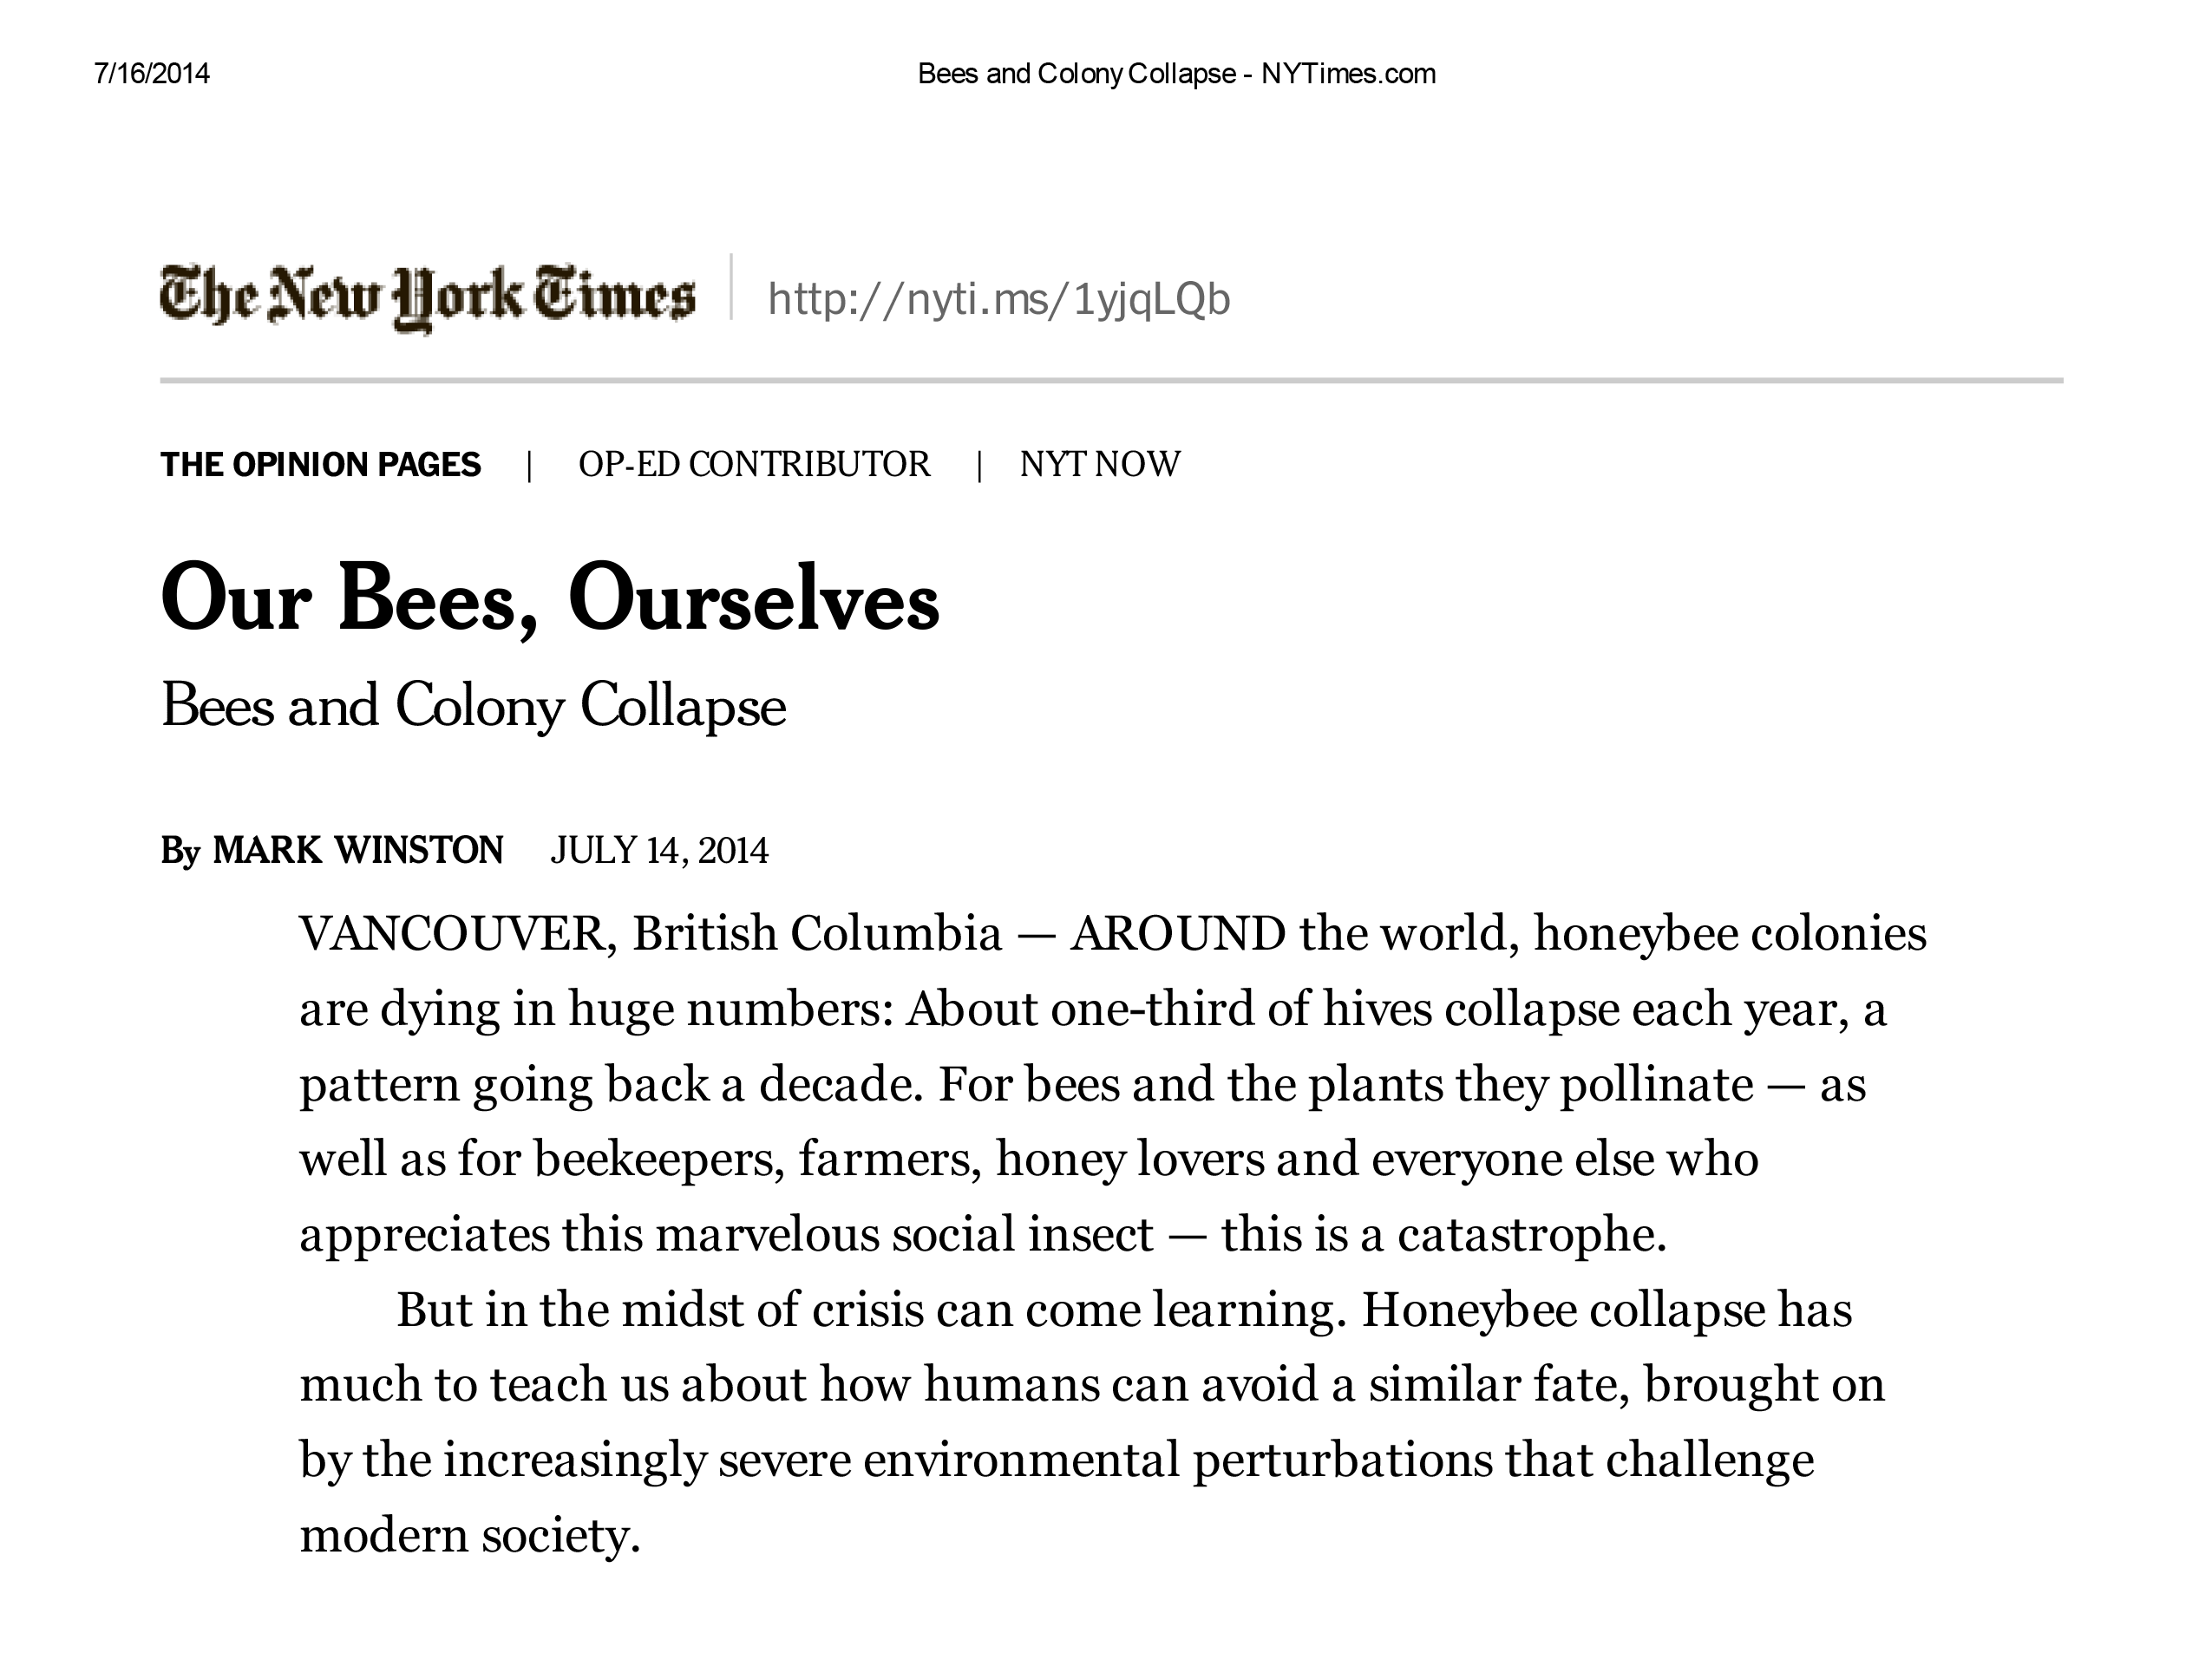 Our Bees, Ourselves by Mark Winston